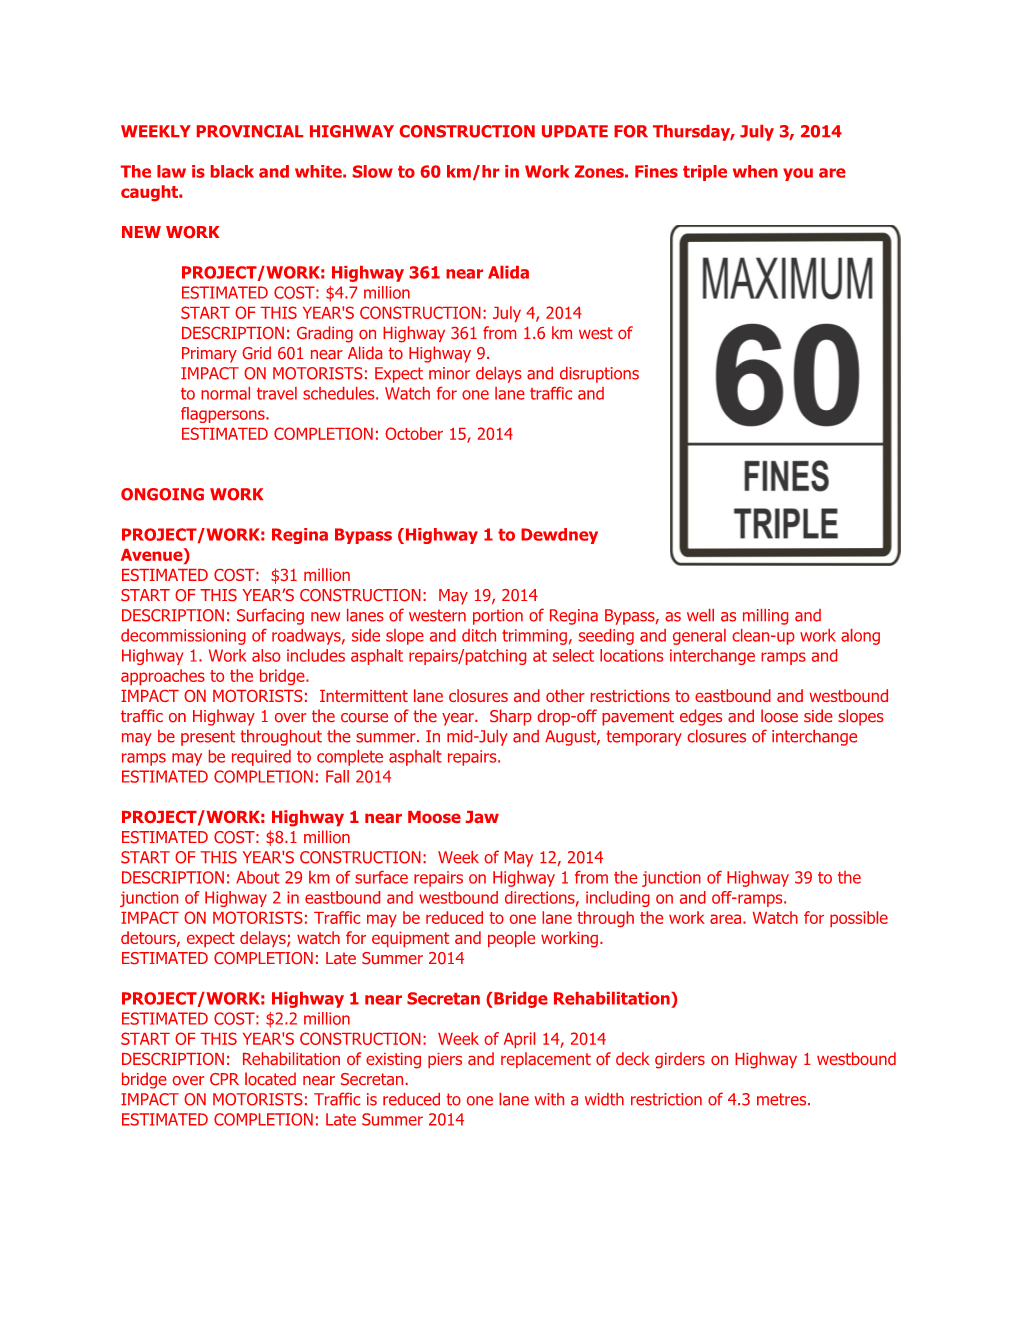 WEEKLY PROVINCIAL HIGHWAY CONSTRUCTION UPDATE for Thursday, July 3, 2014